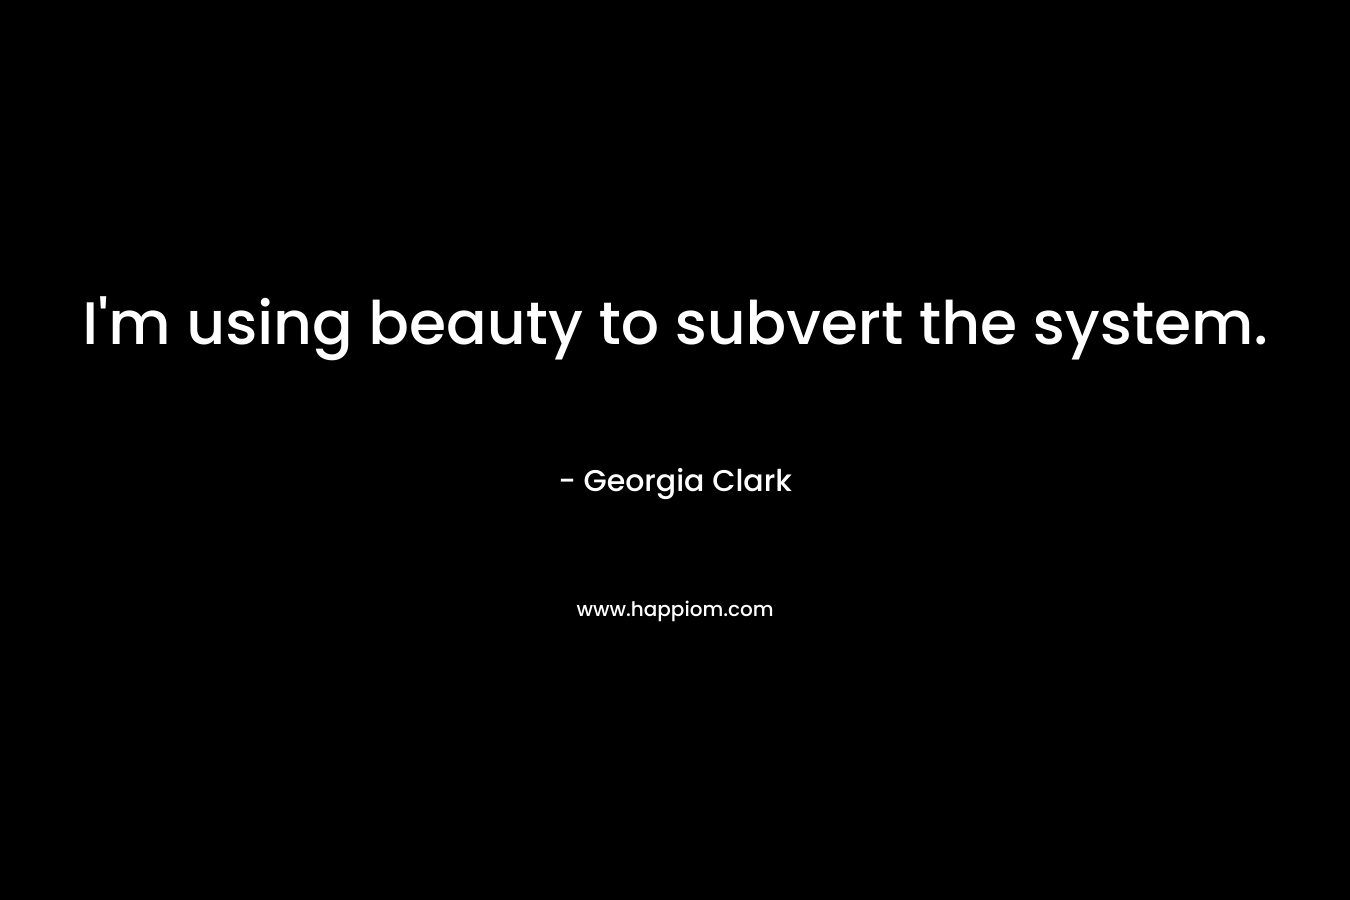 I’m using beauty to subvert the system. – Georgia Clark